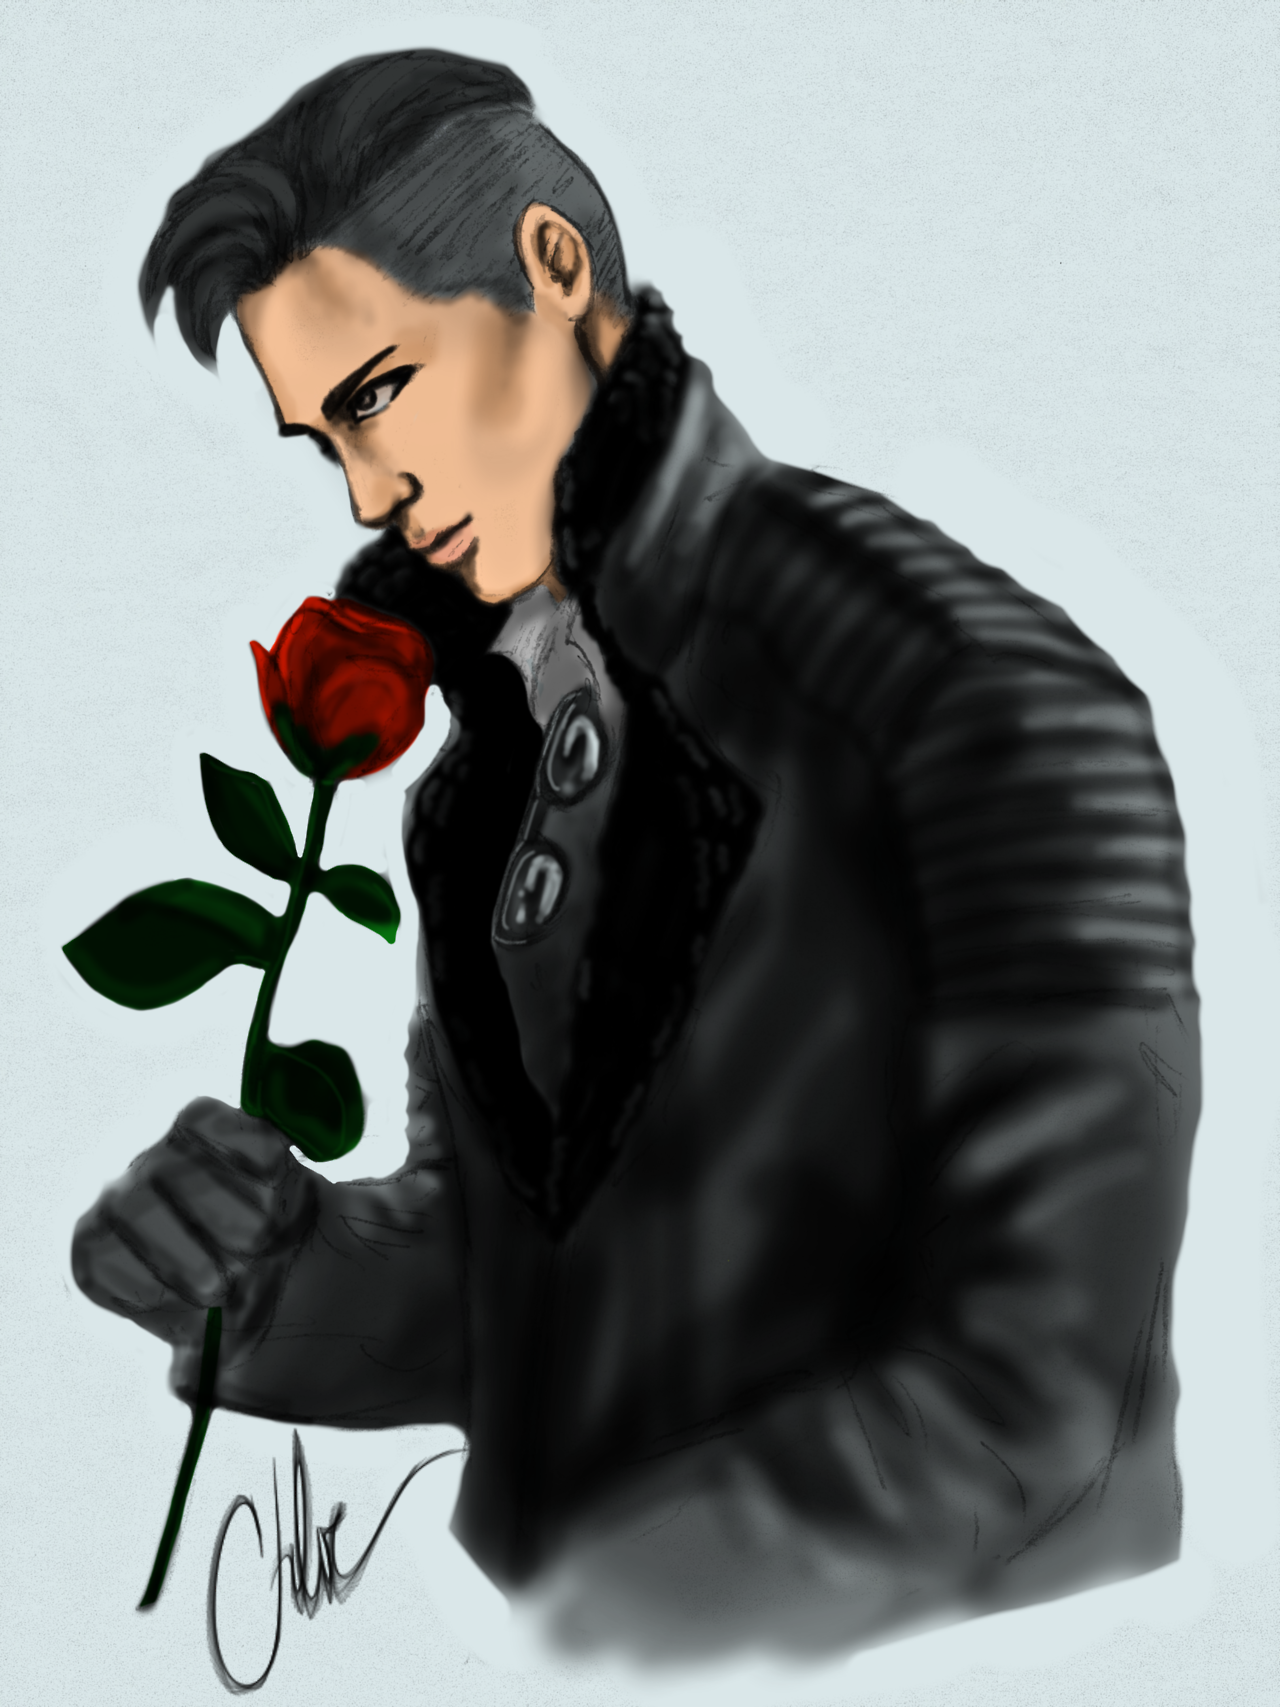 yurihoplisetsky: decided to draw Otabek in a pose from the Otabek lookalike’s account.